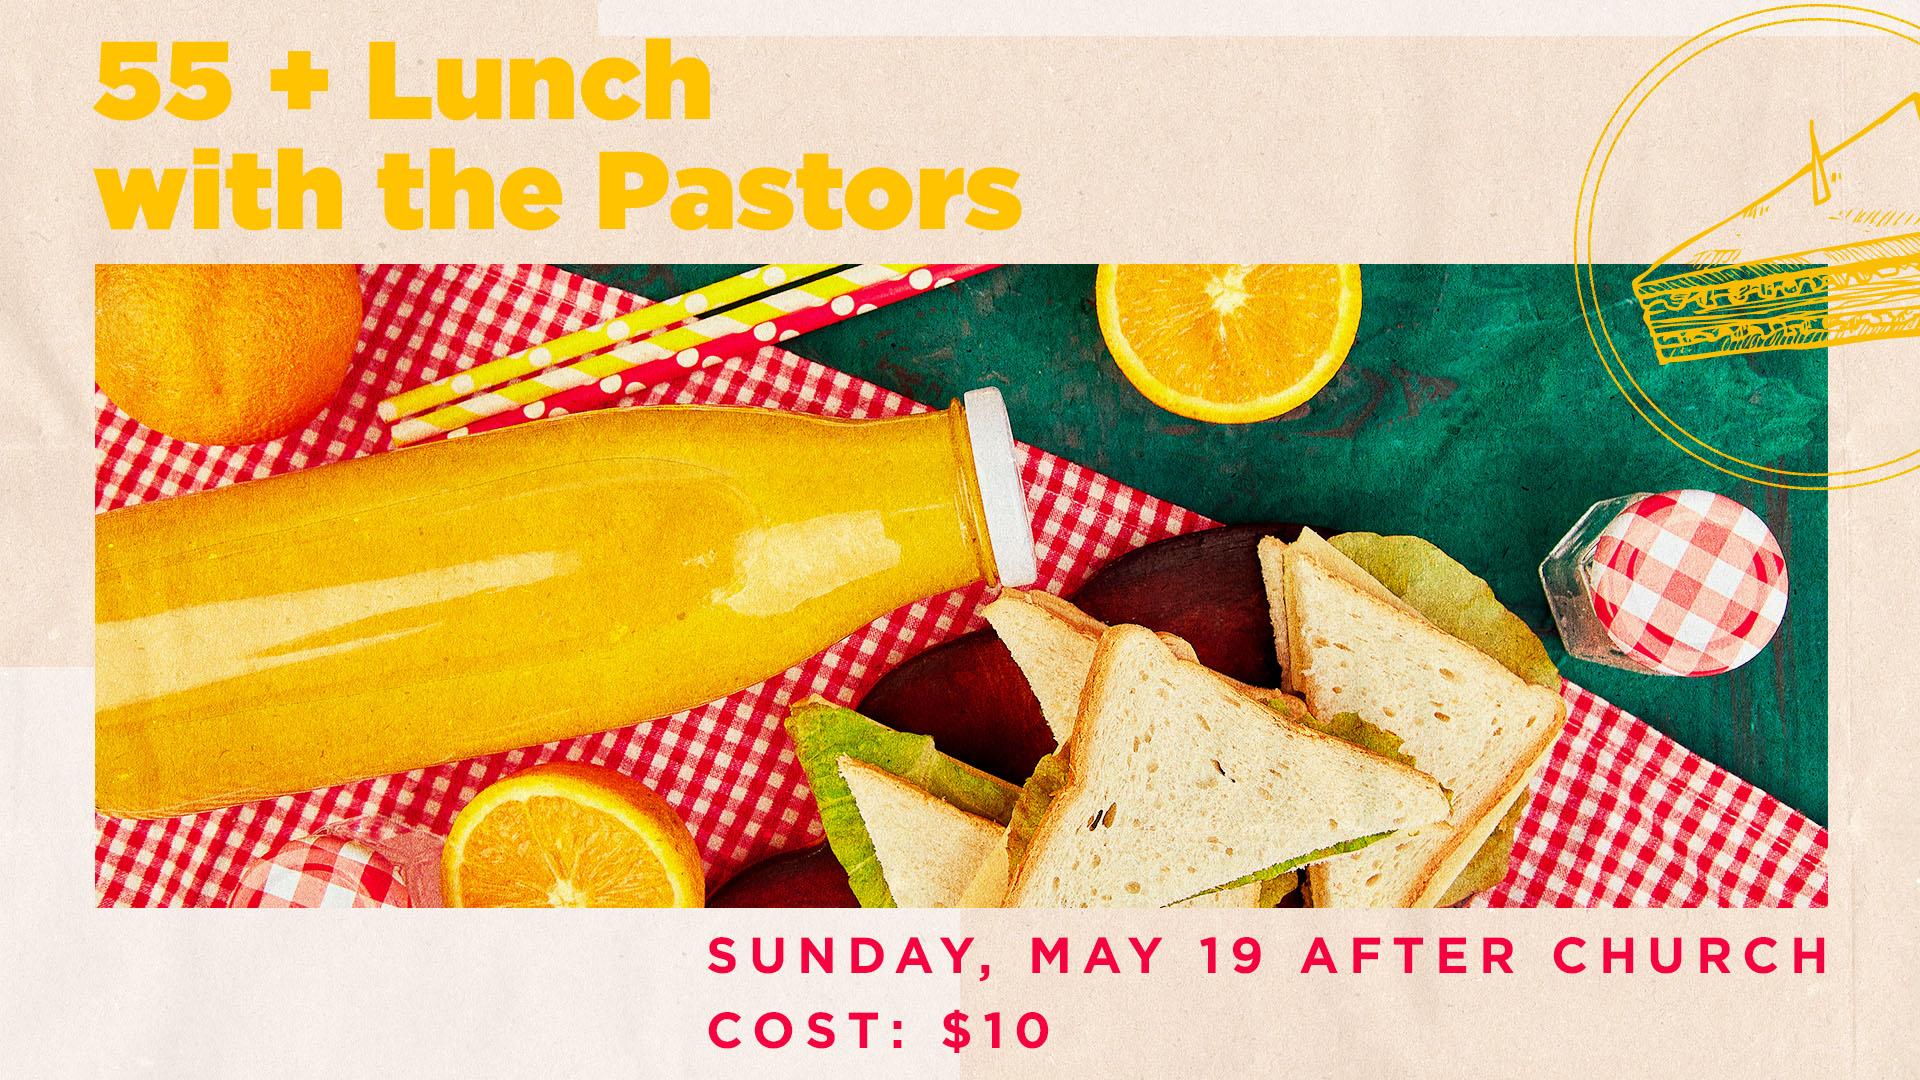 55+ Lunch with the Pastors